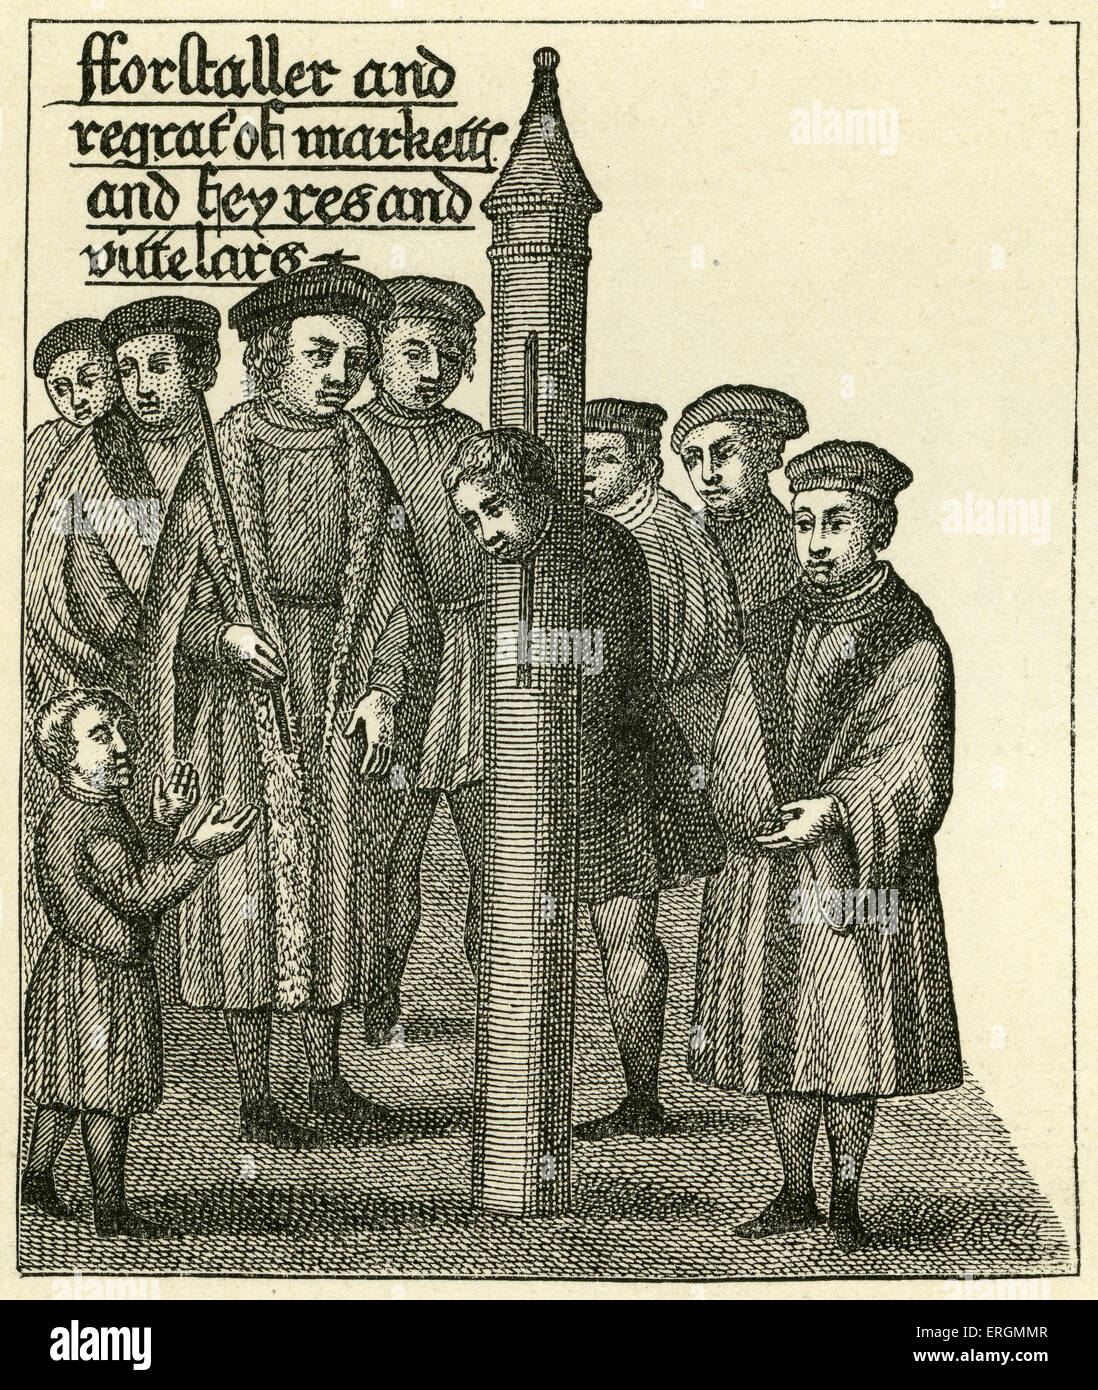 A forestaller in the pillory. The pillory was a wooden or metal post used for restraining petty criminals.The punishment, like Stock Photo